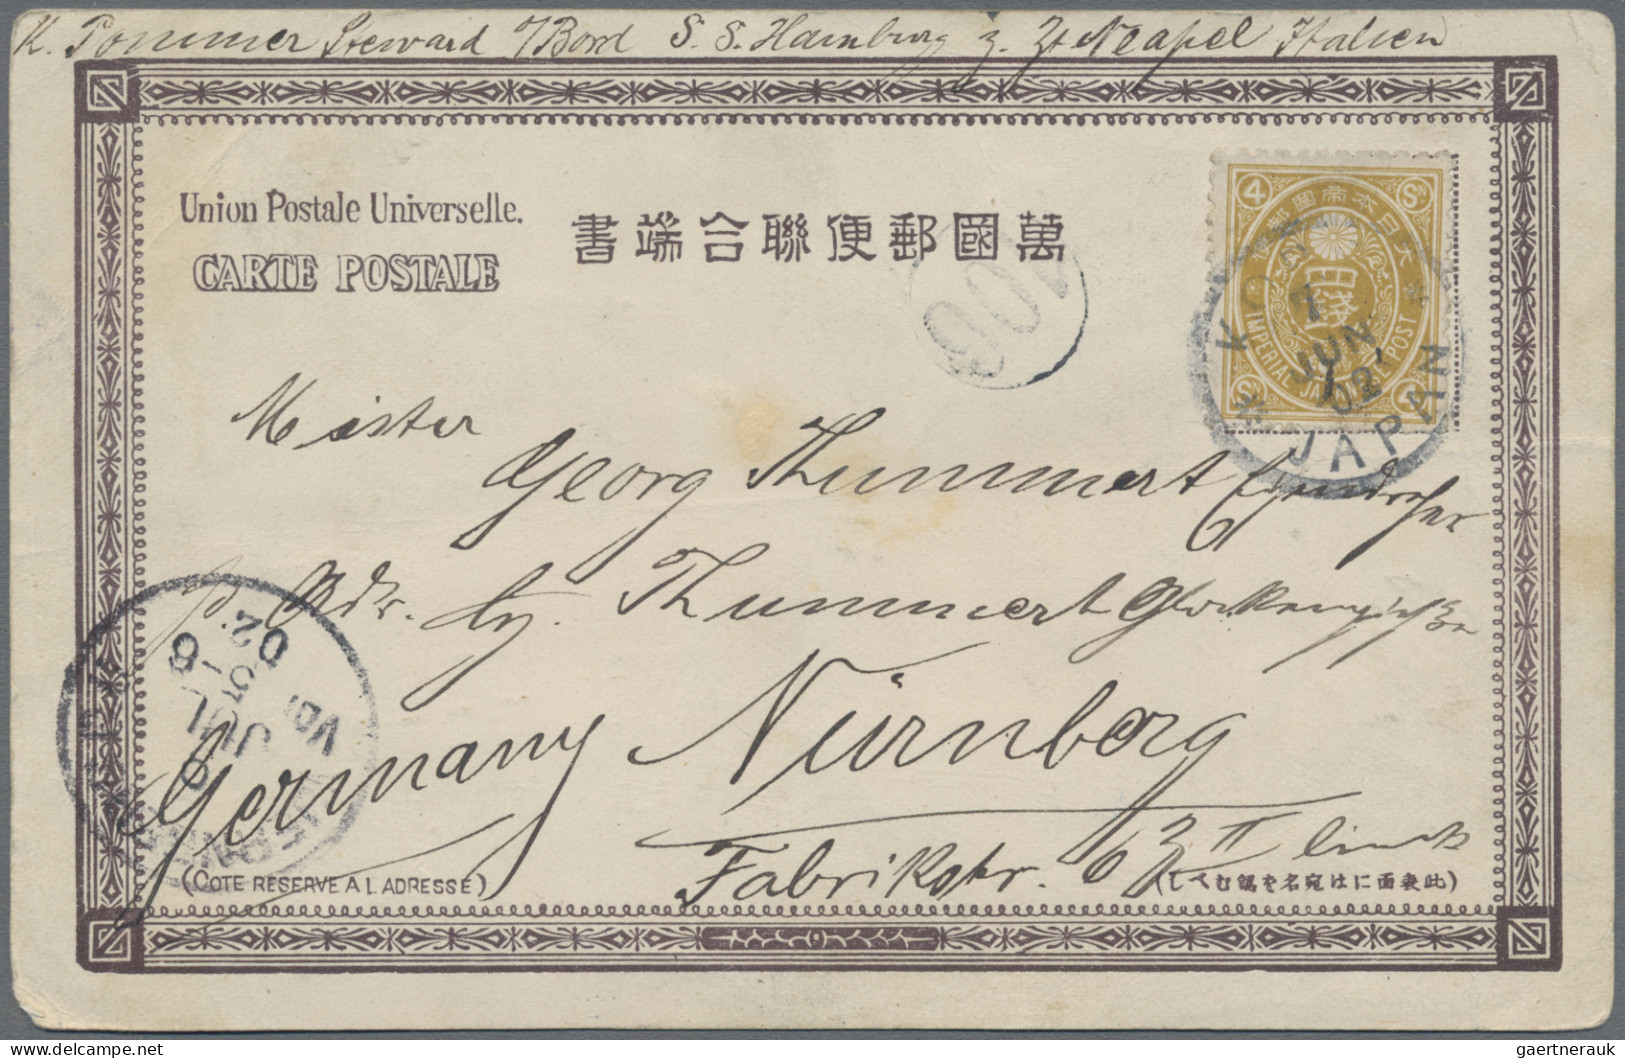 Japan: 1874/1953 (ca.), group of approx. 40 covers (inc. several FDC) plus some